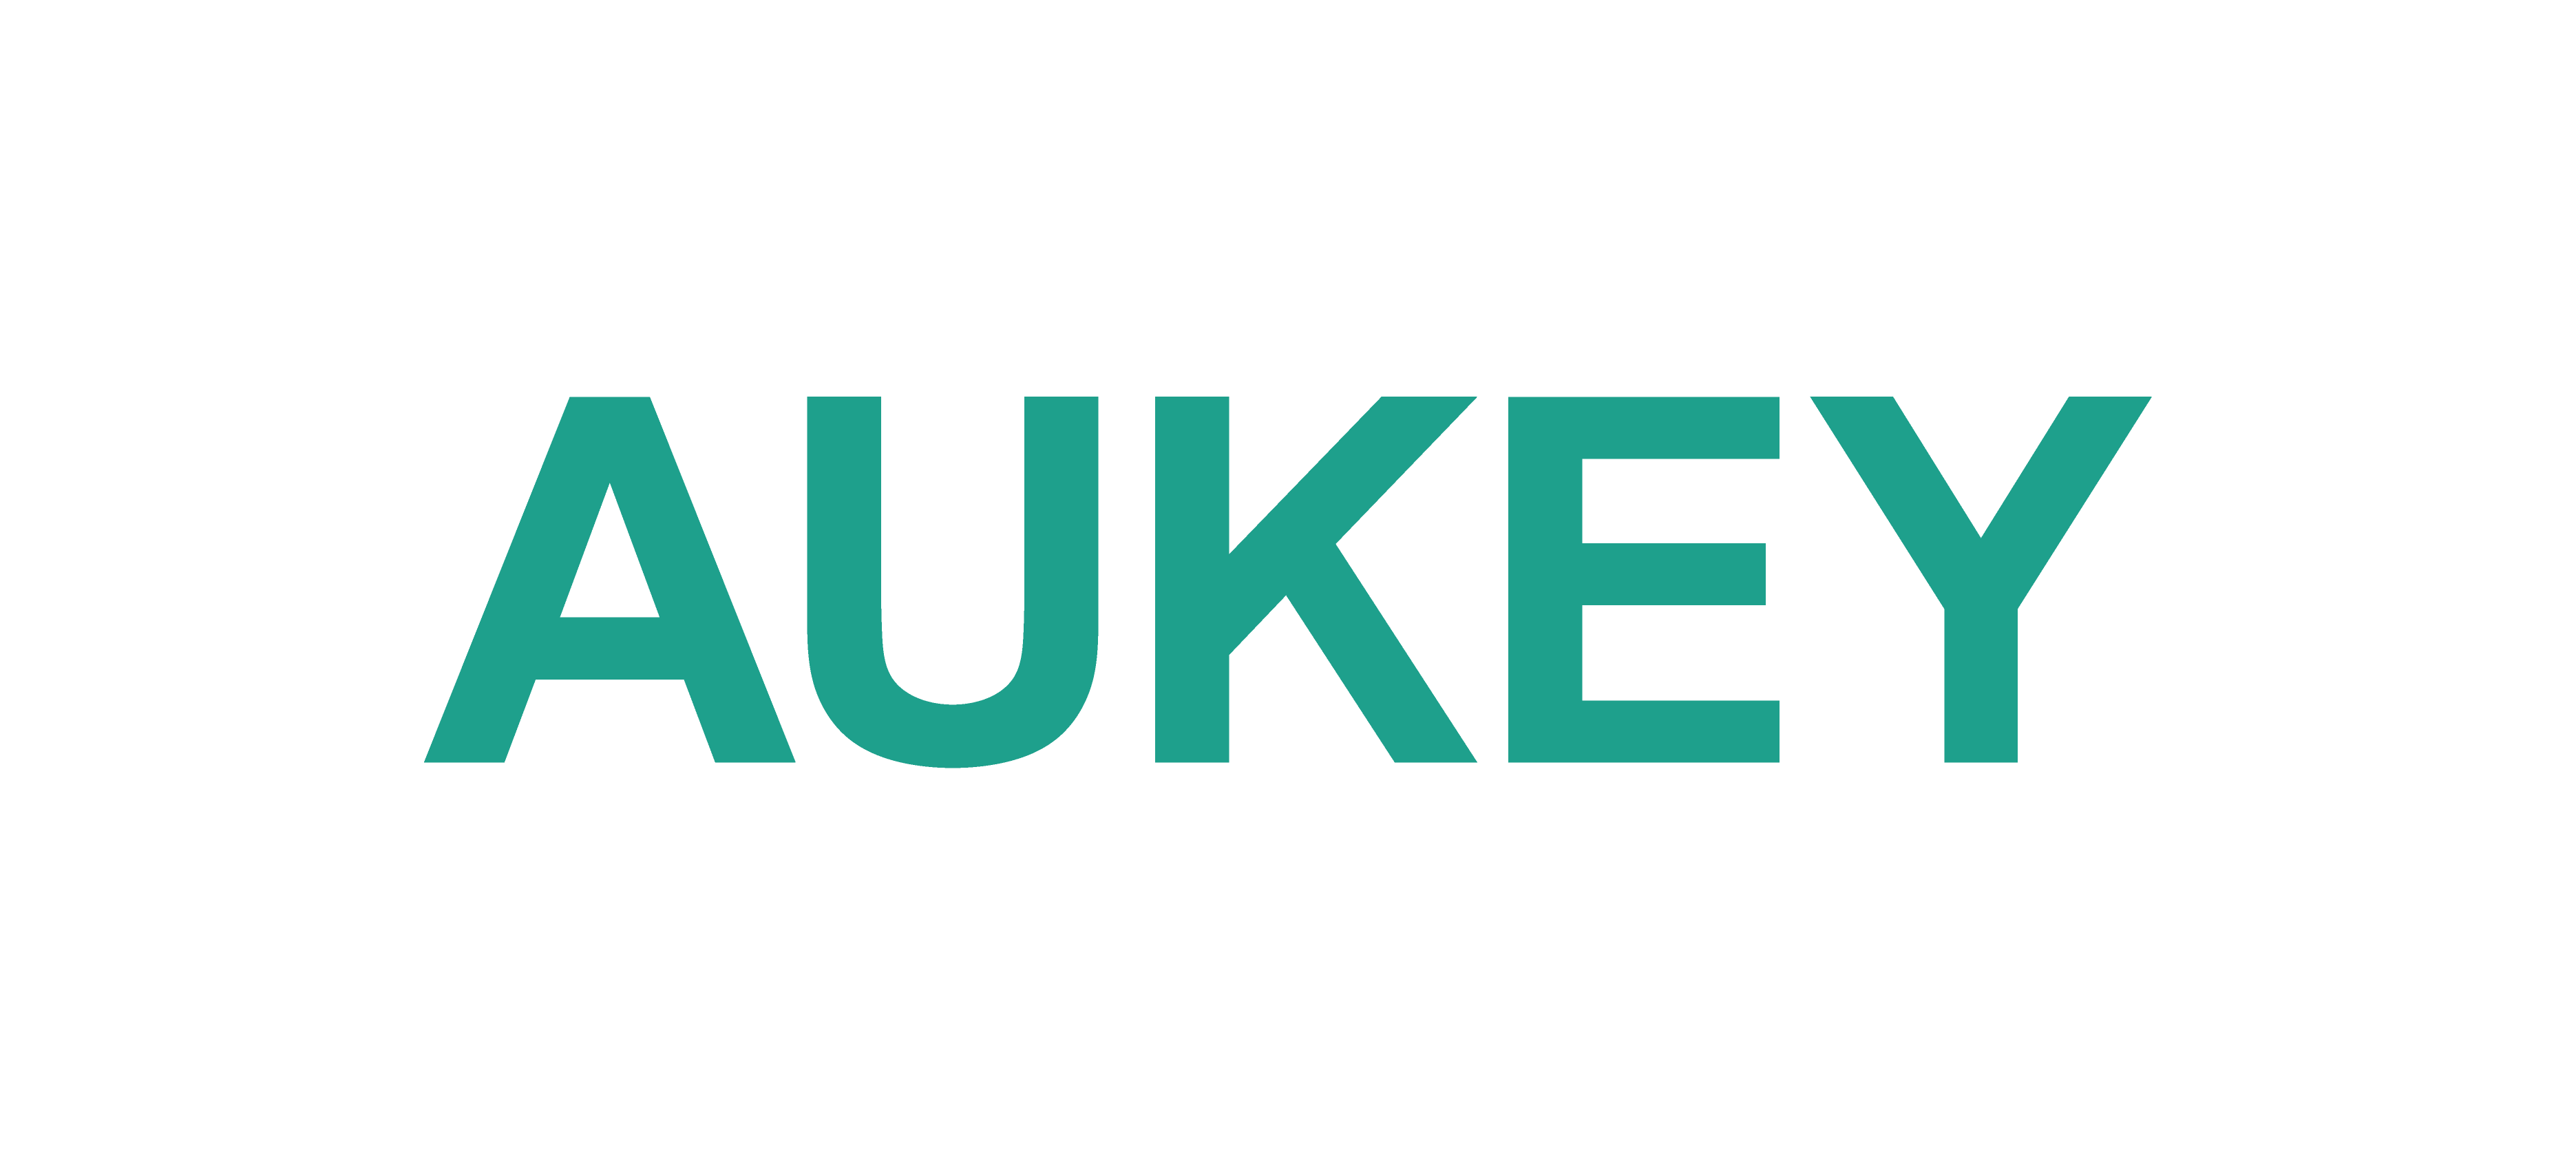 AUKEY Launches Two Award-Winning Wireless Charging Stations